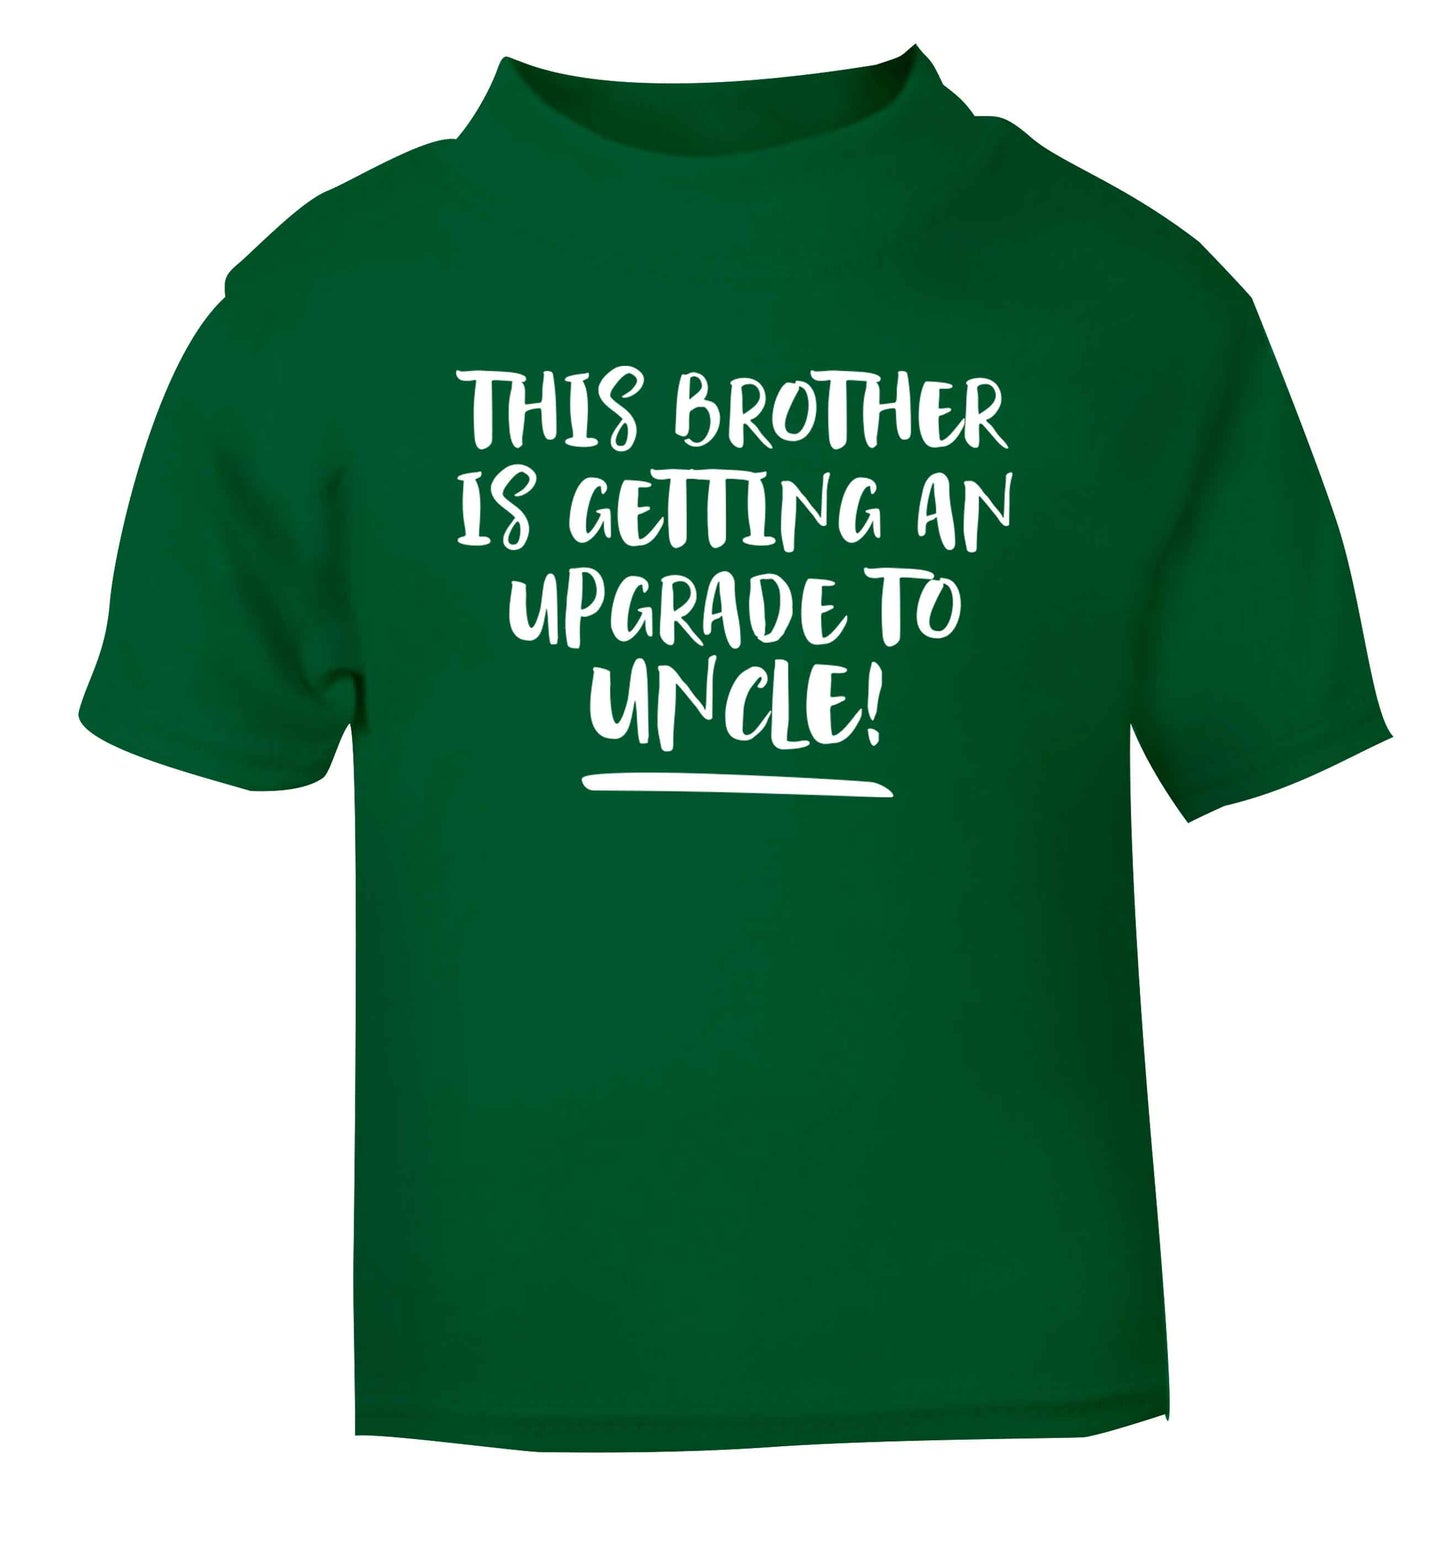 This brother is getting an upgrade to uncle! green Baby Toddler Tshirt 2 Years